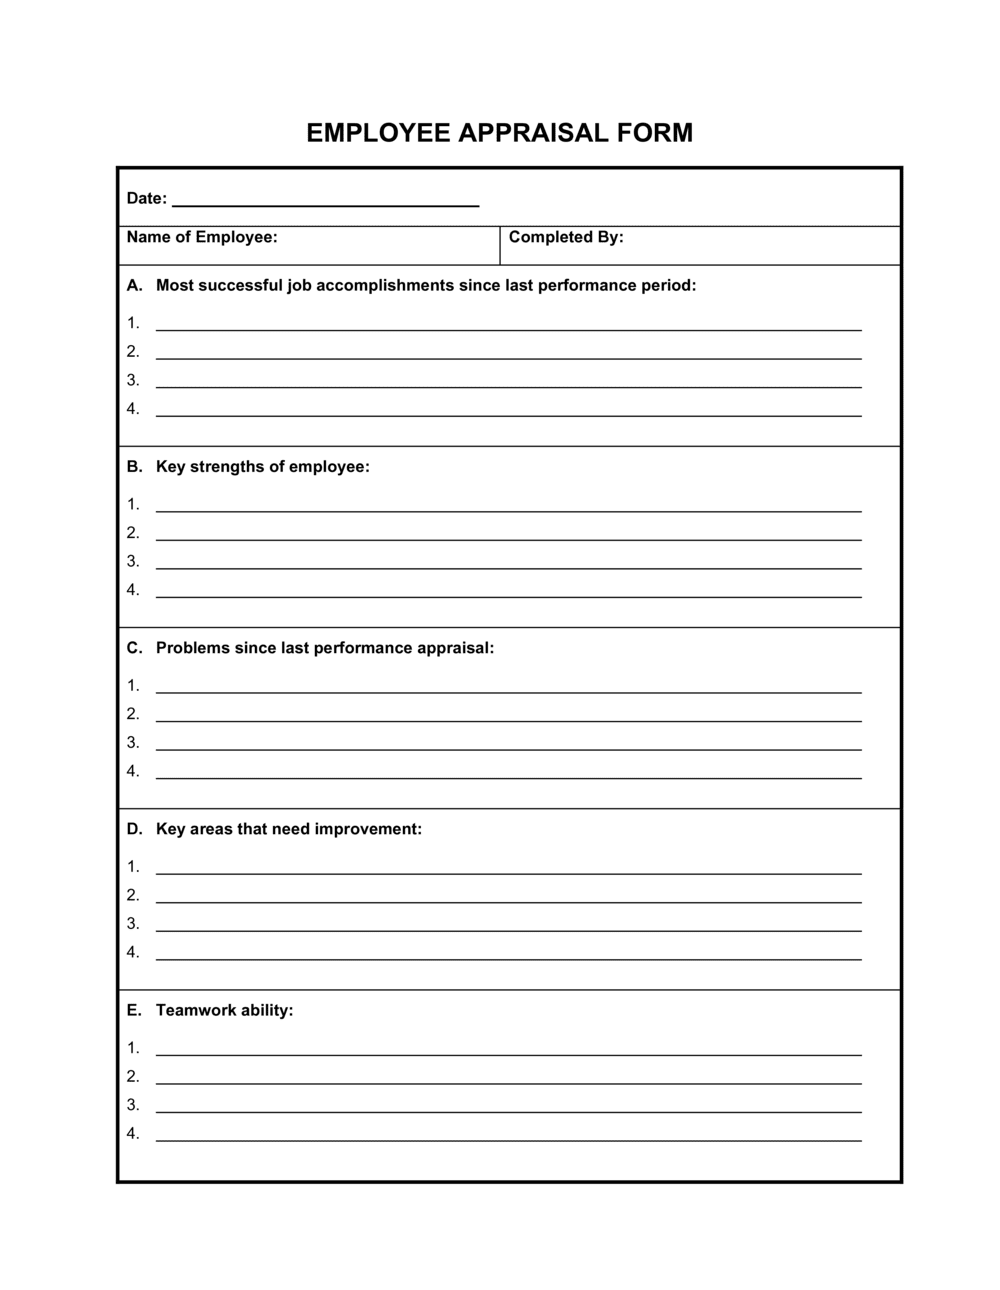 Employee Appraisal Form Template By Business in a Box 